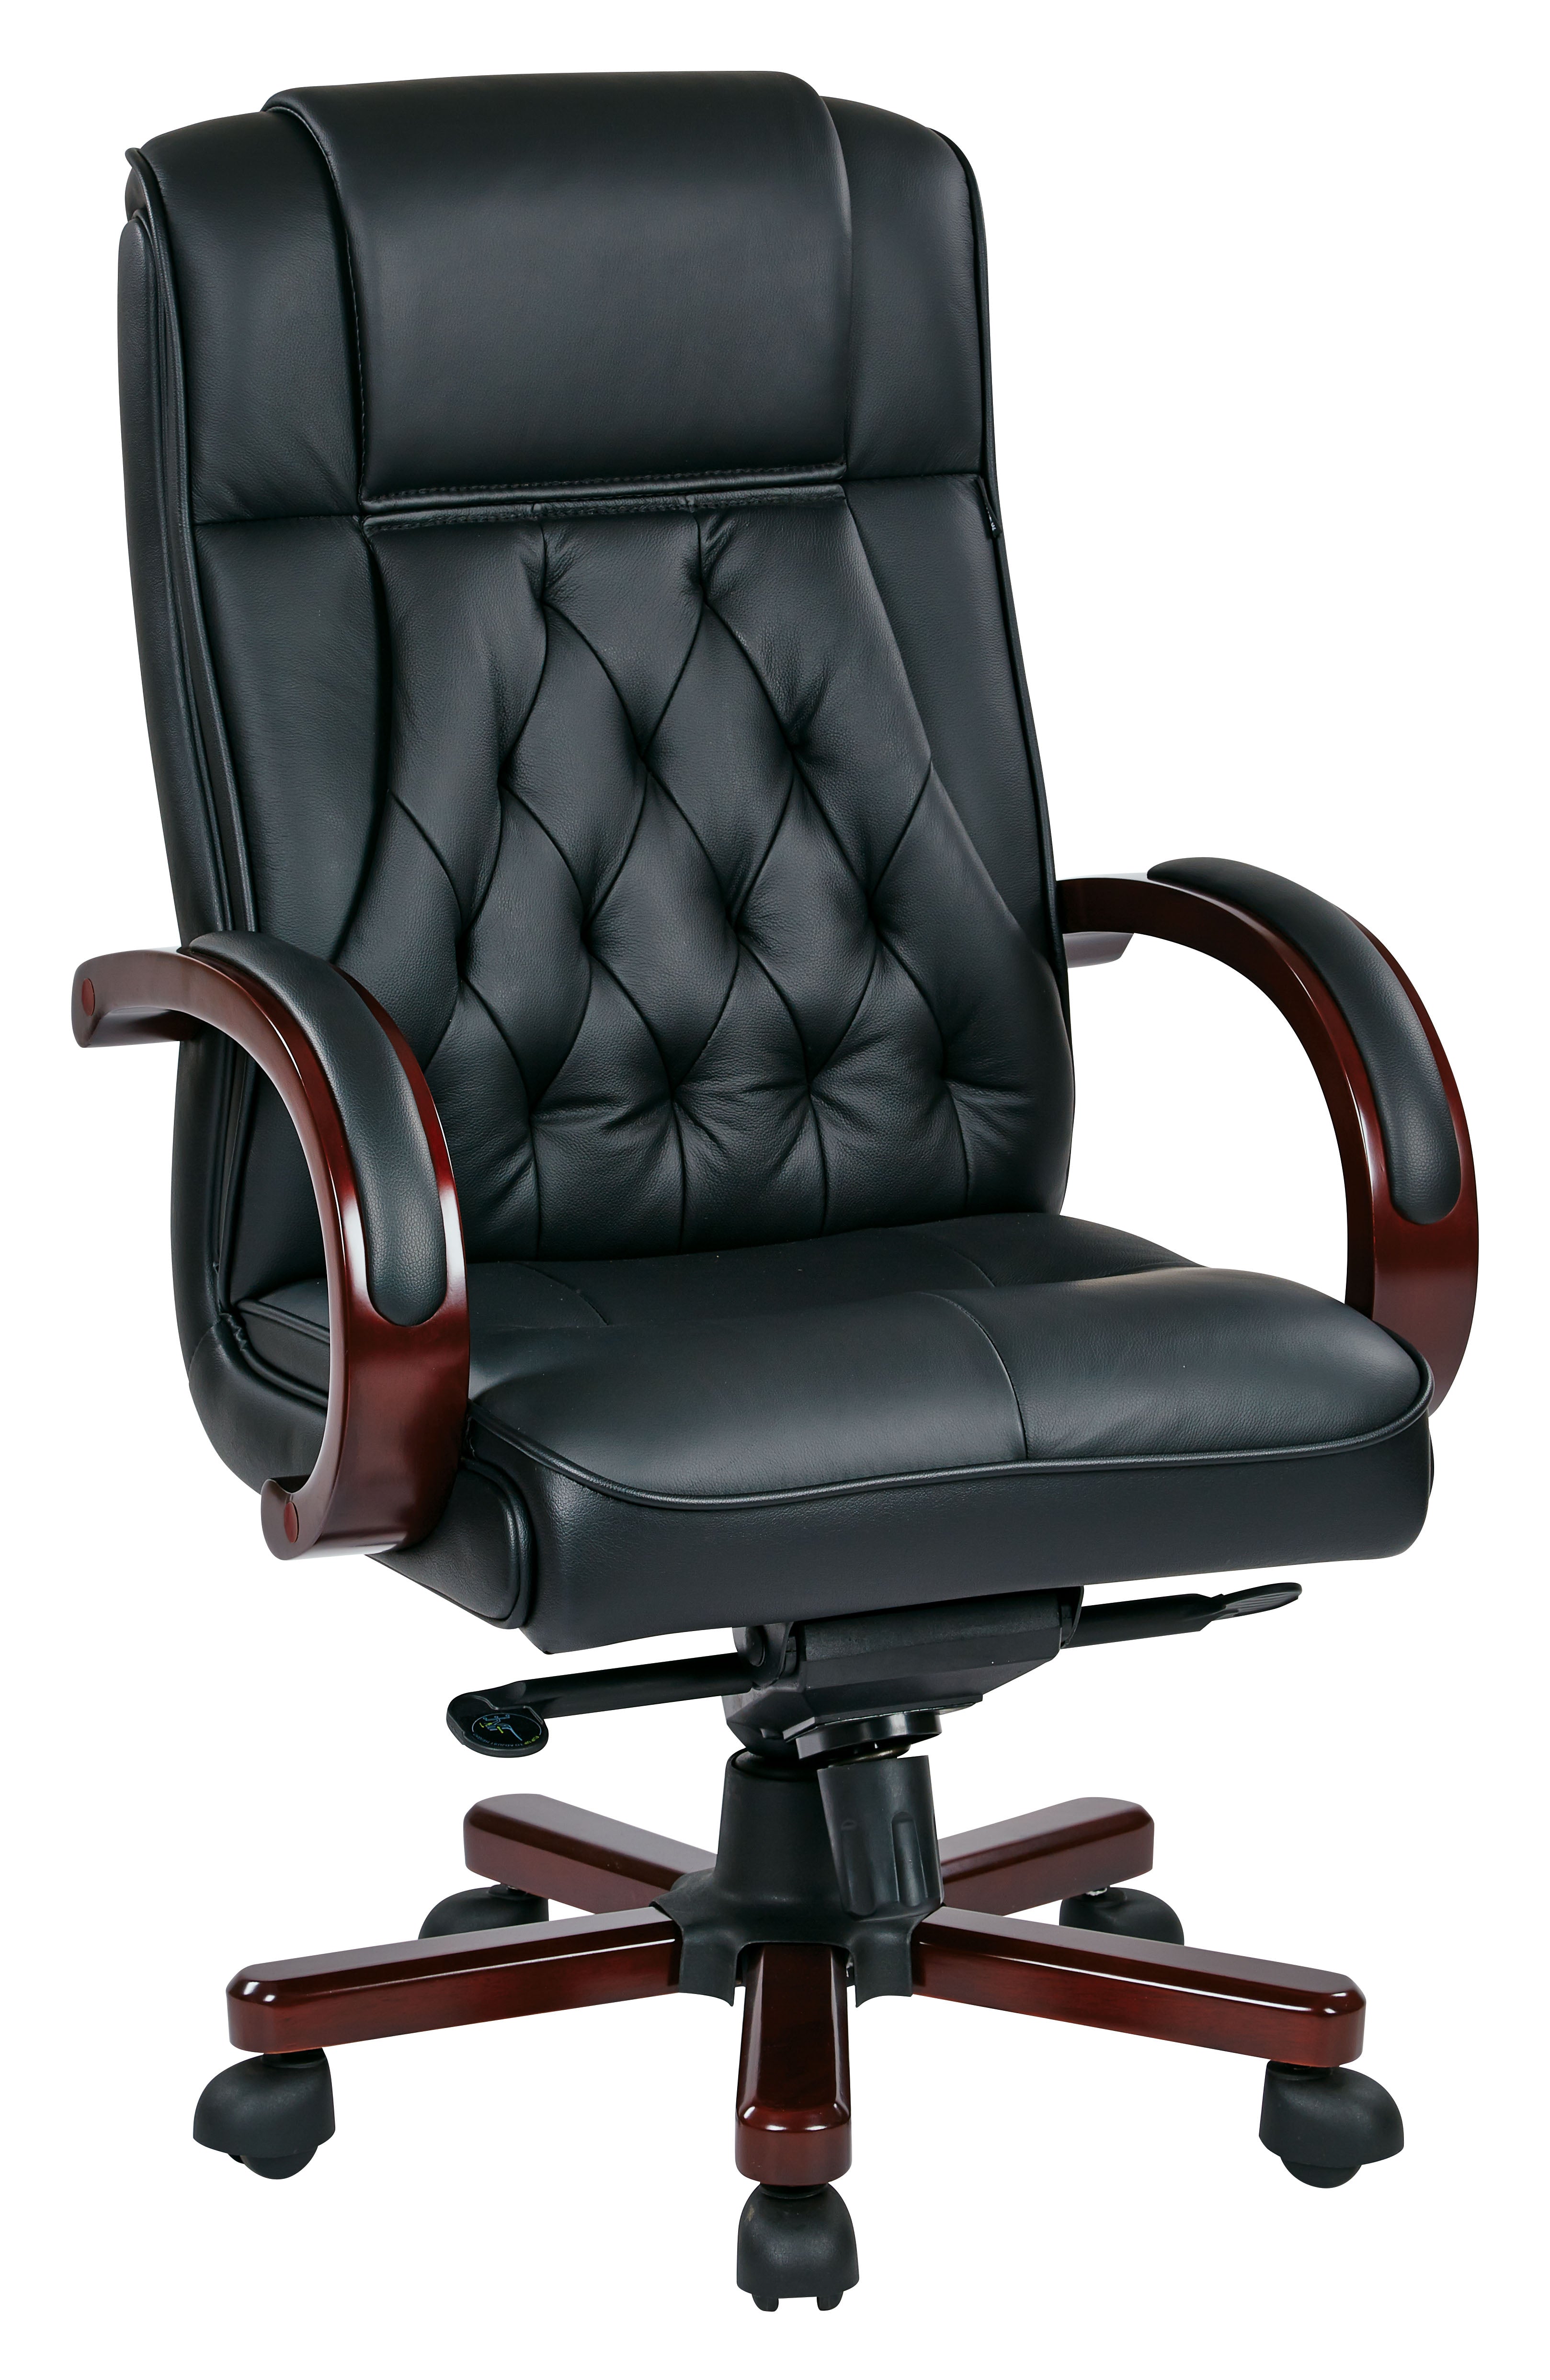 TWN300L - Traditional High Back Executive Leather Office Chair by Office Star